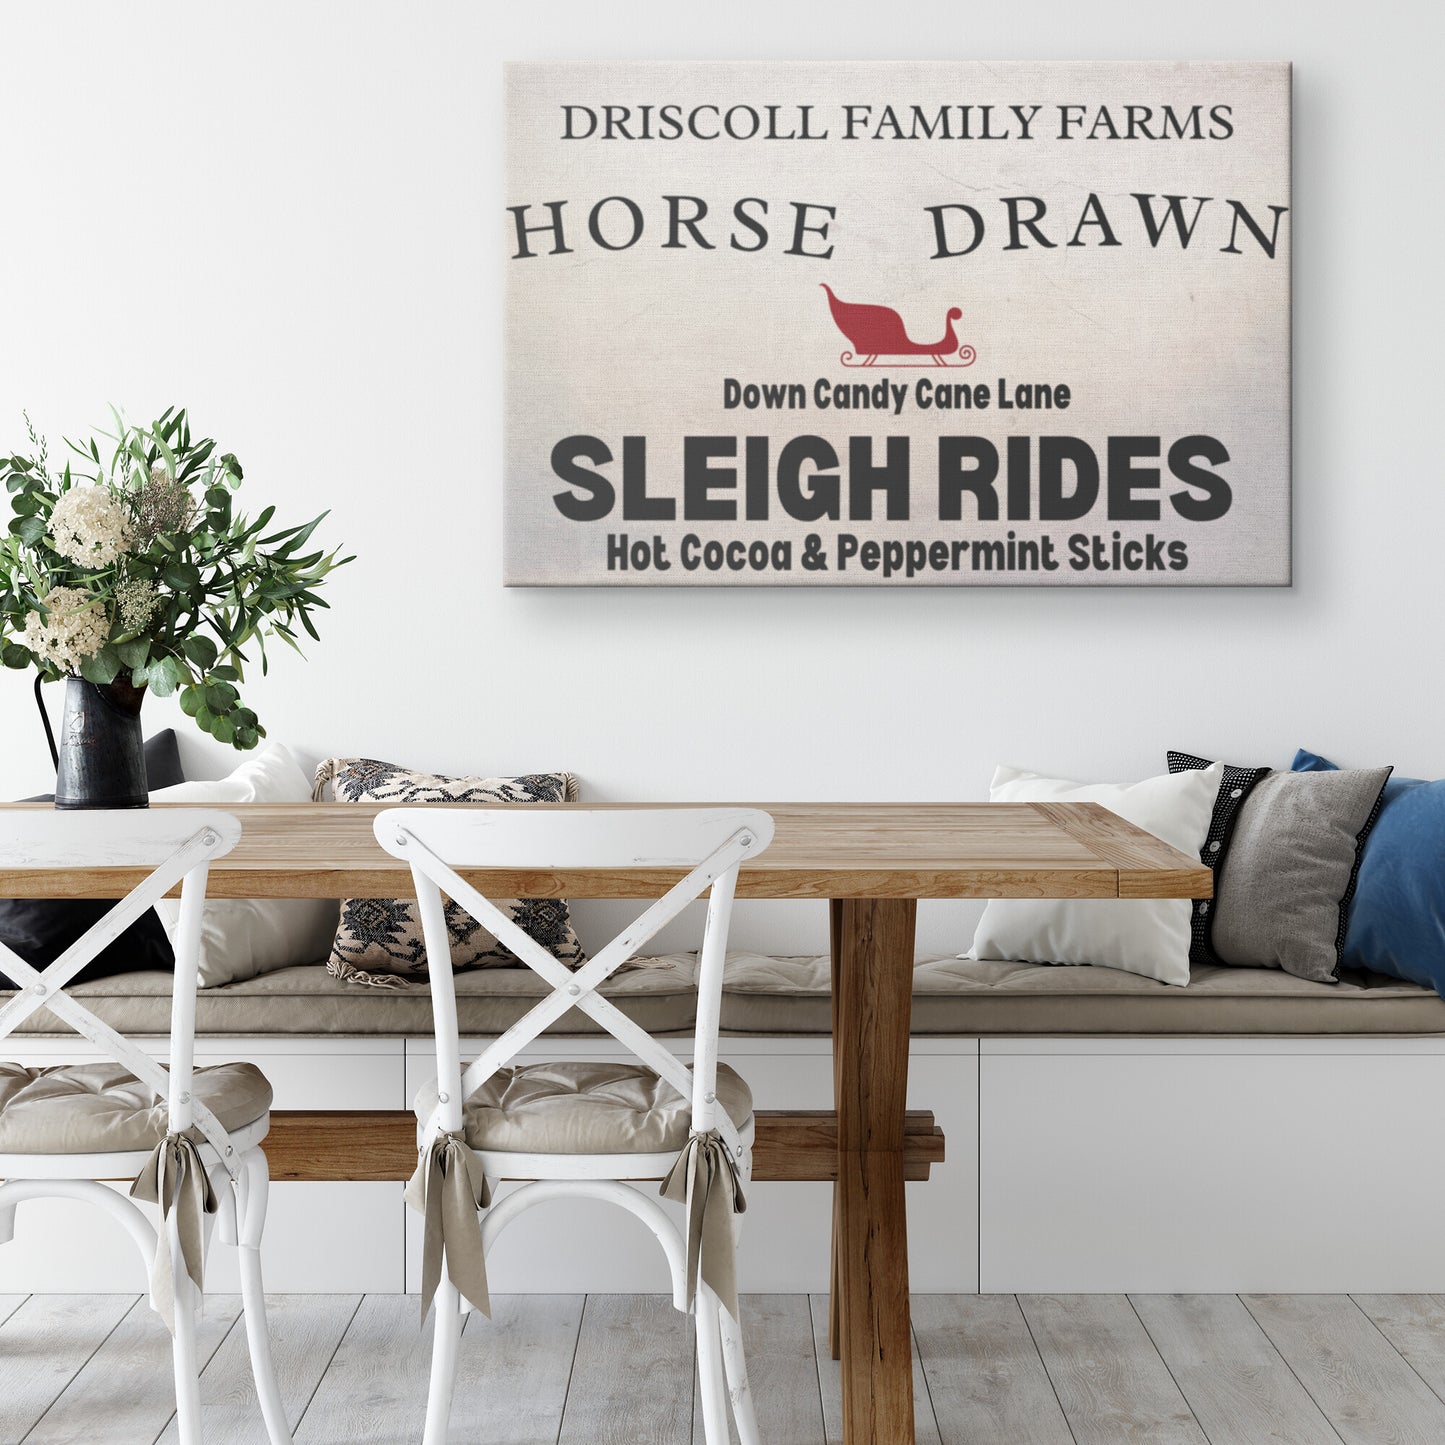 Personalized Christmas Decor Sign | Custom Family Name Sign | Modern Farmhouse Wall Decor | Welcome Home Holiday Wall Art | Canvas Print | Xmas Gift